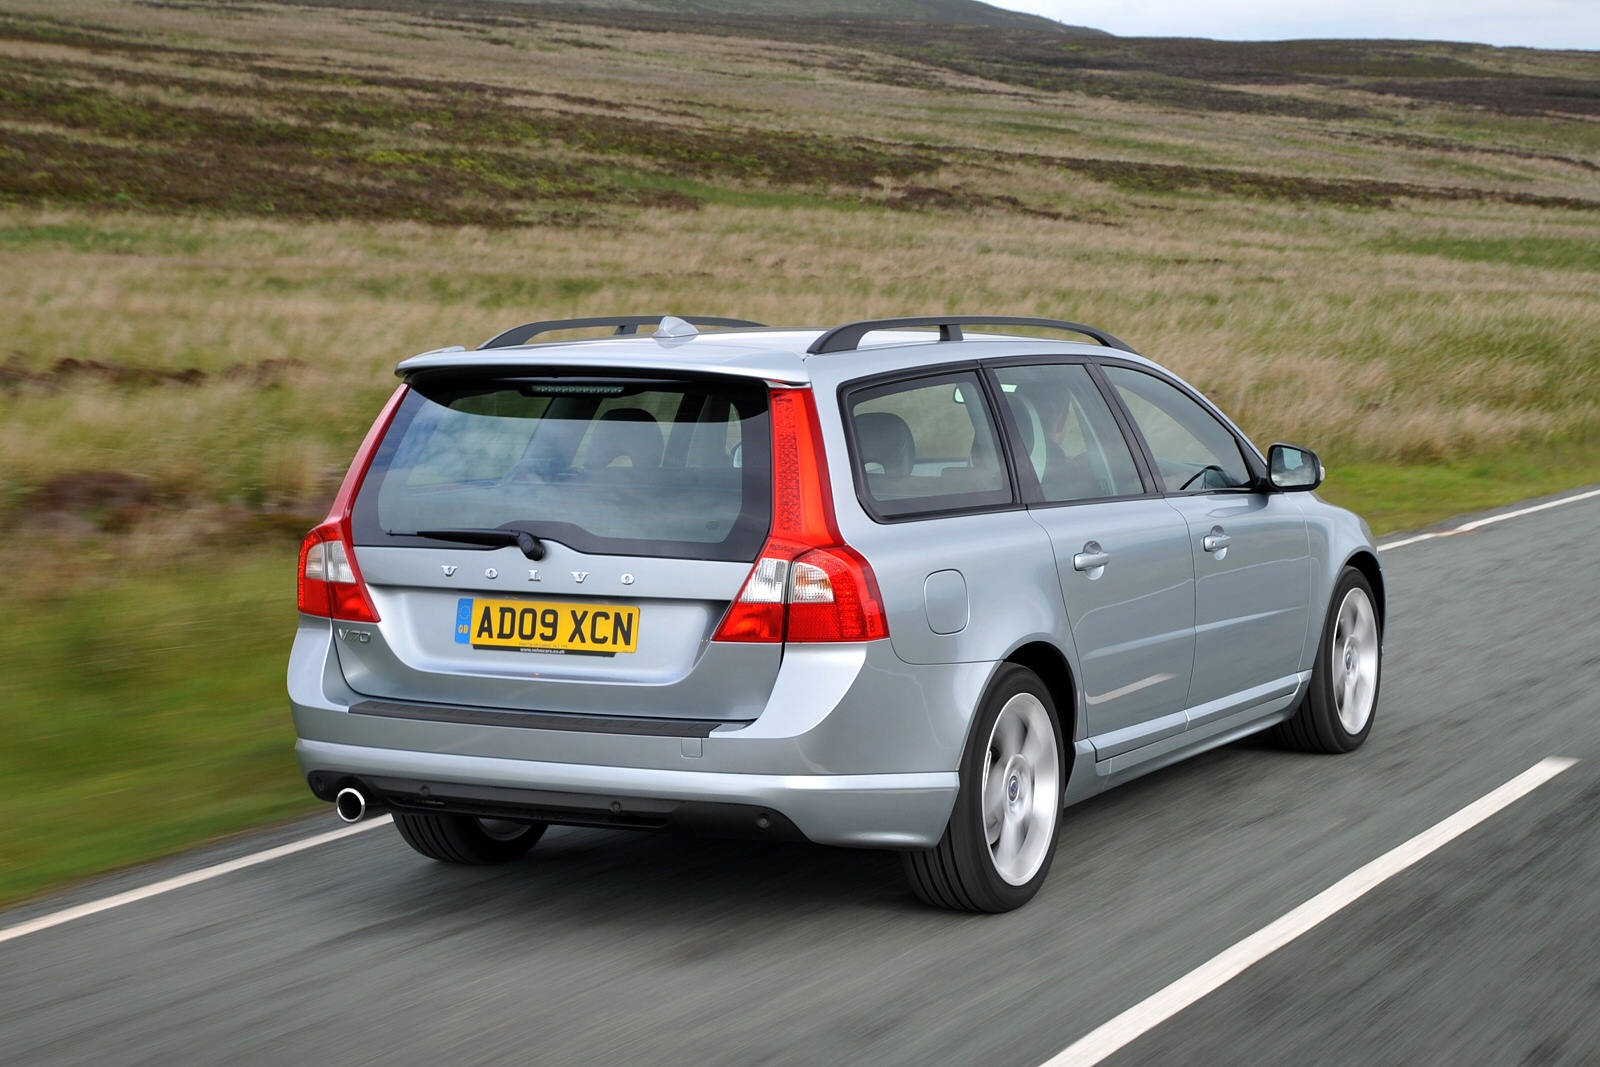 Volvo V70 DRIVe - DRIVe DOWN YOUR COSTS